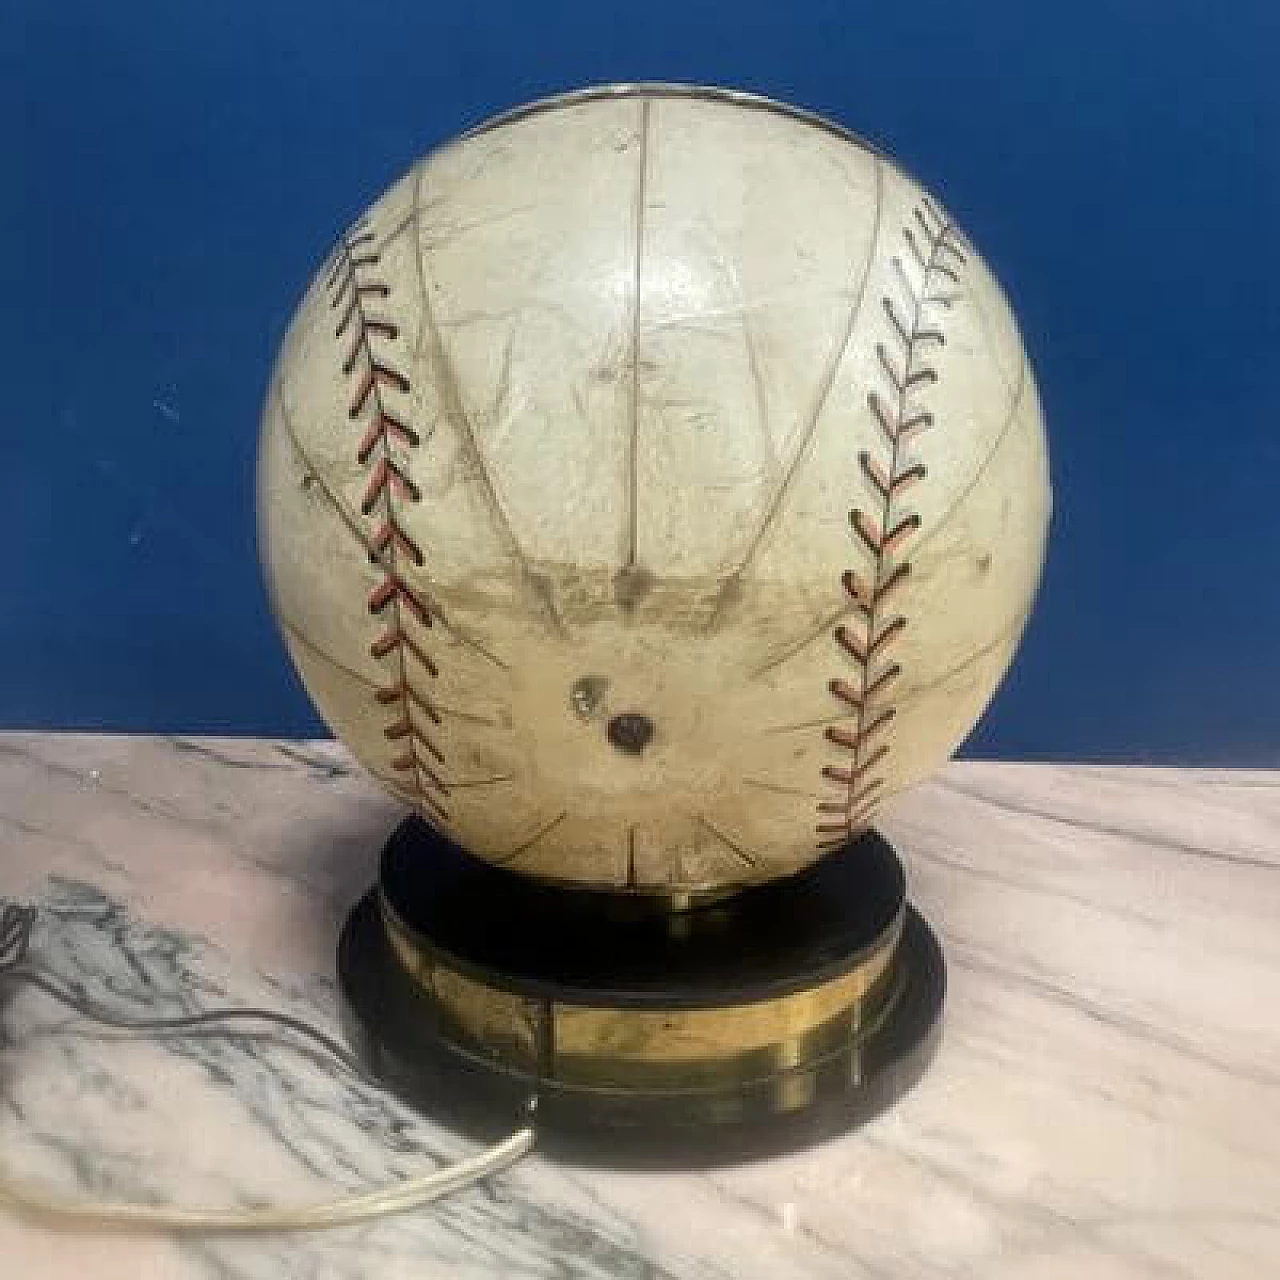 Radio trophy in the shape of a baseball, 1941 6